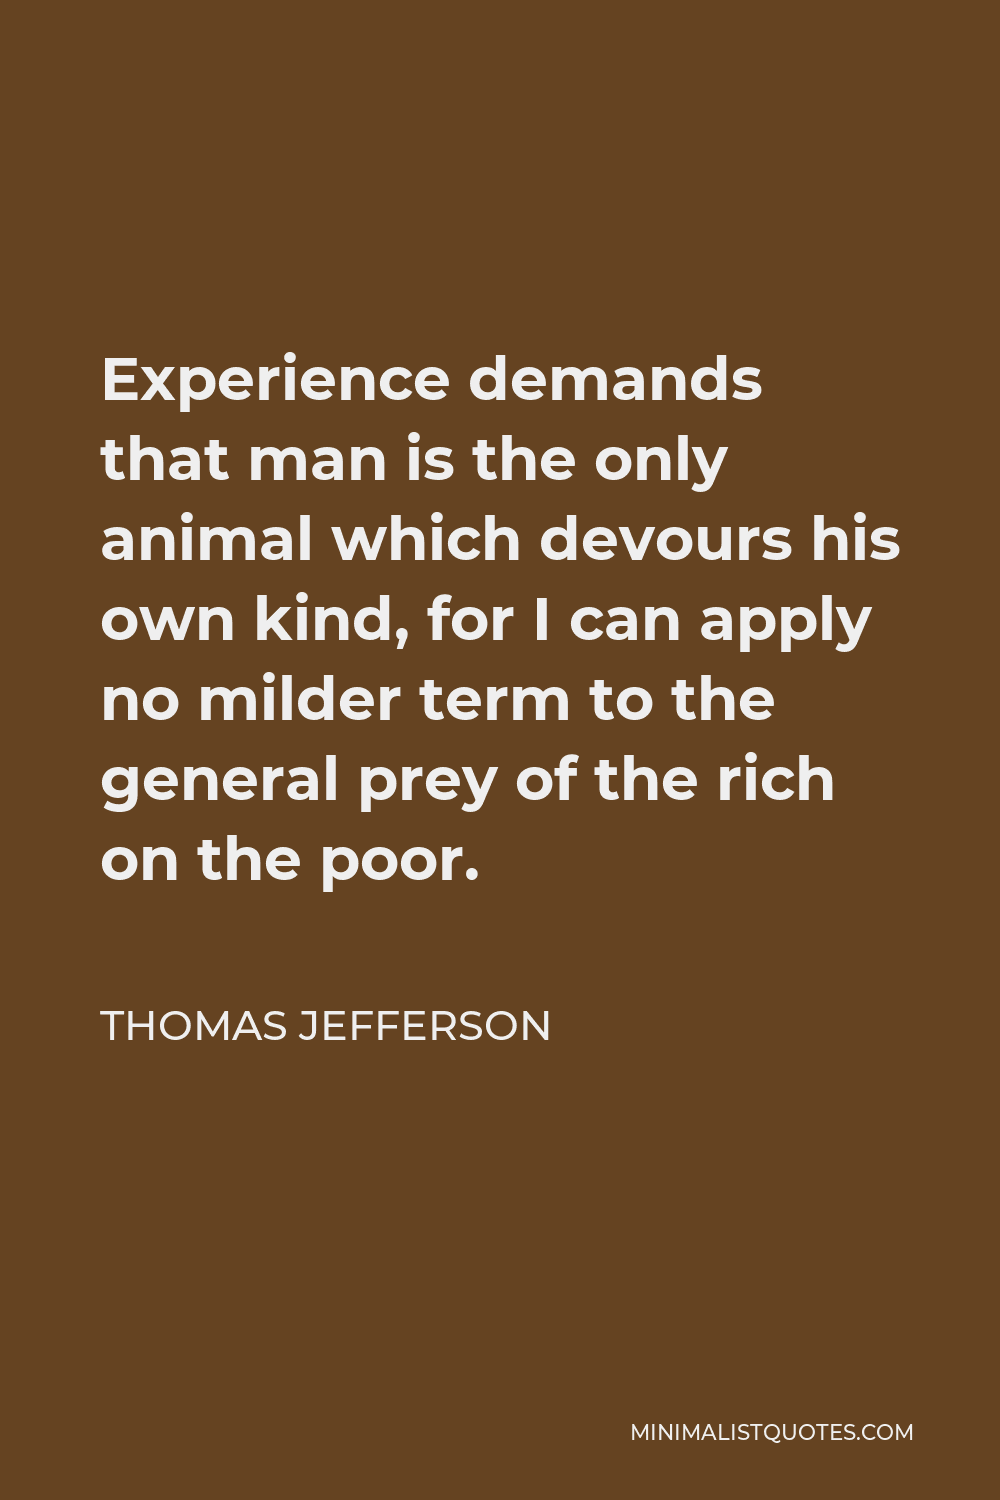 Thomas Jefferson Quote - Experience demands that man is the only animal which devours his own kind, for I can apply no milder term to the general prey of the rich on the poor.